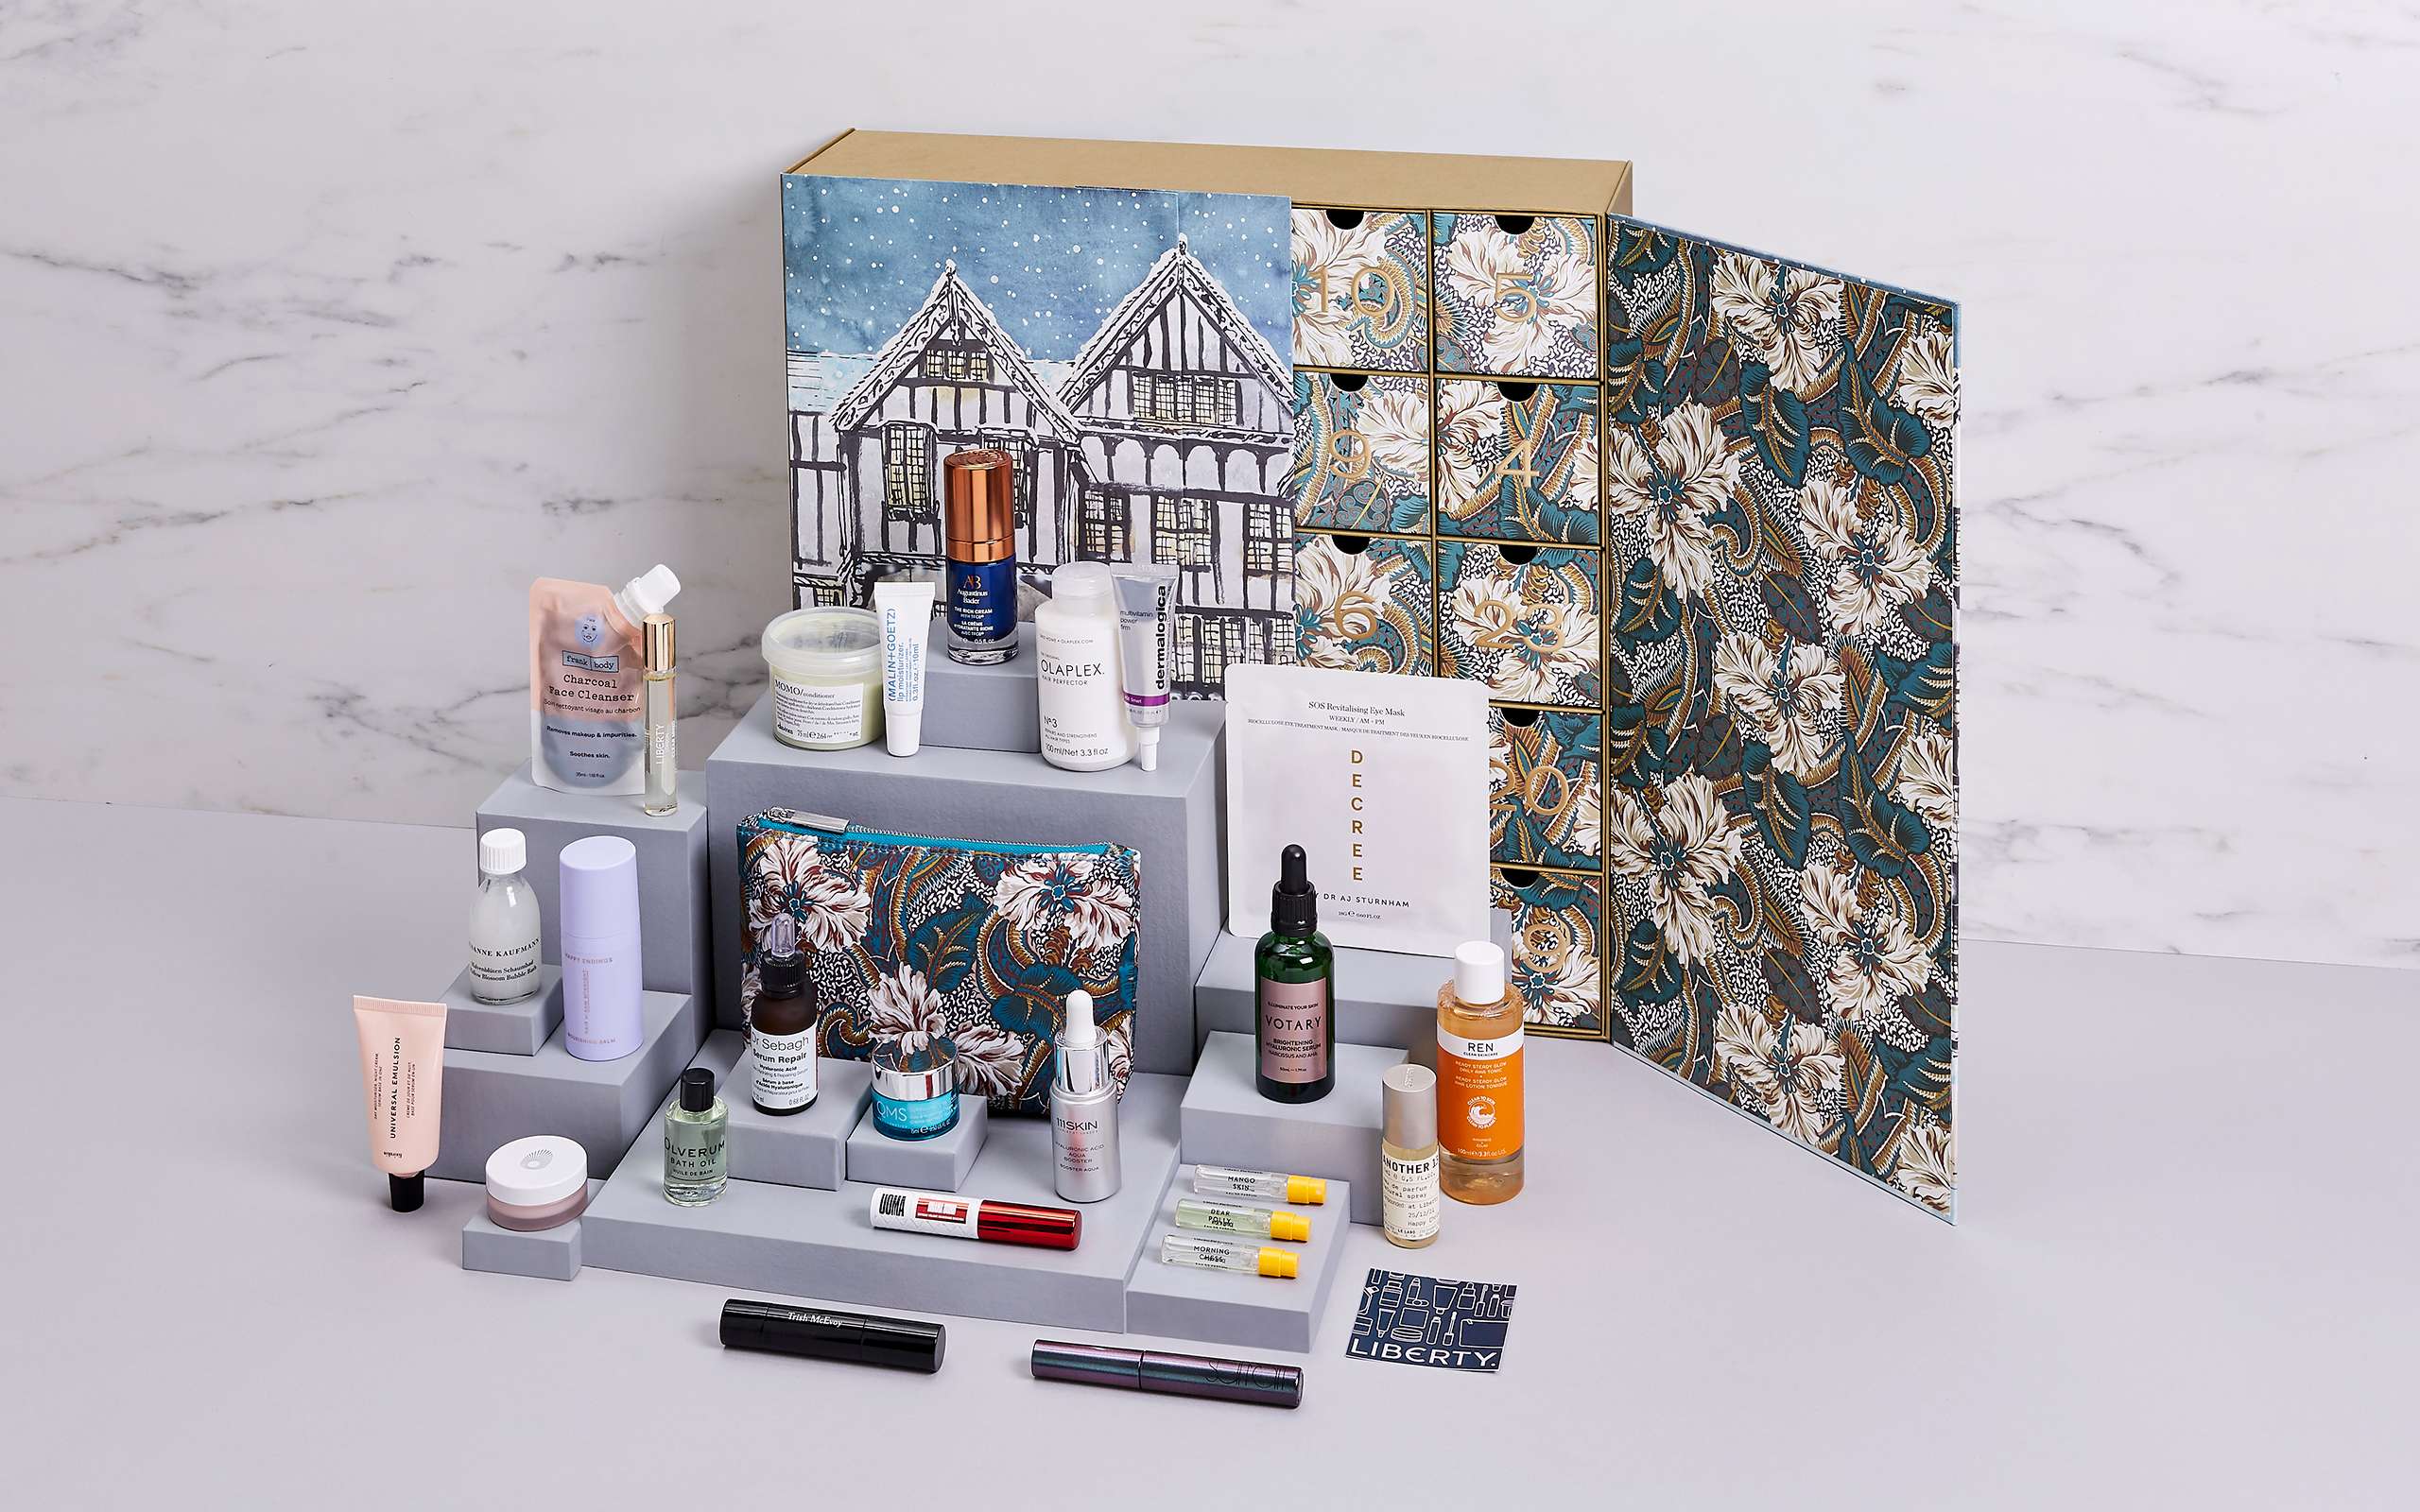 Already thinking about the 2022 Liberty Beauty Advent Calendar?